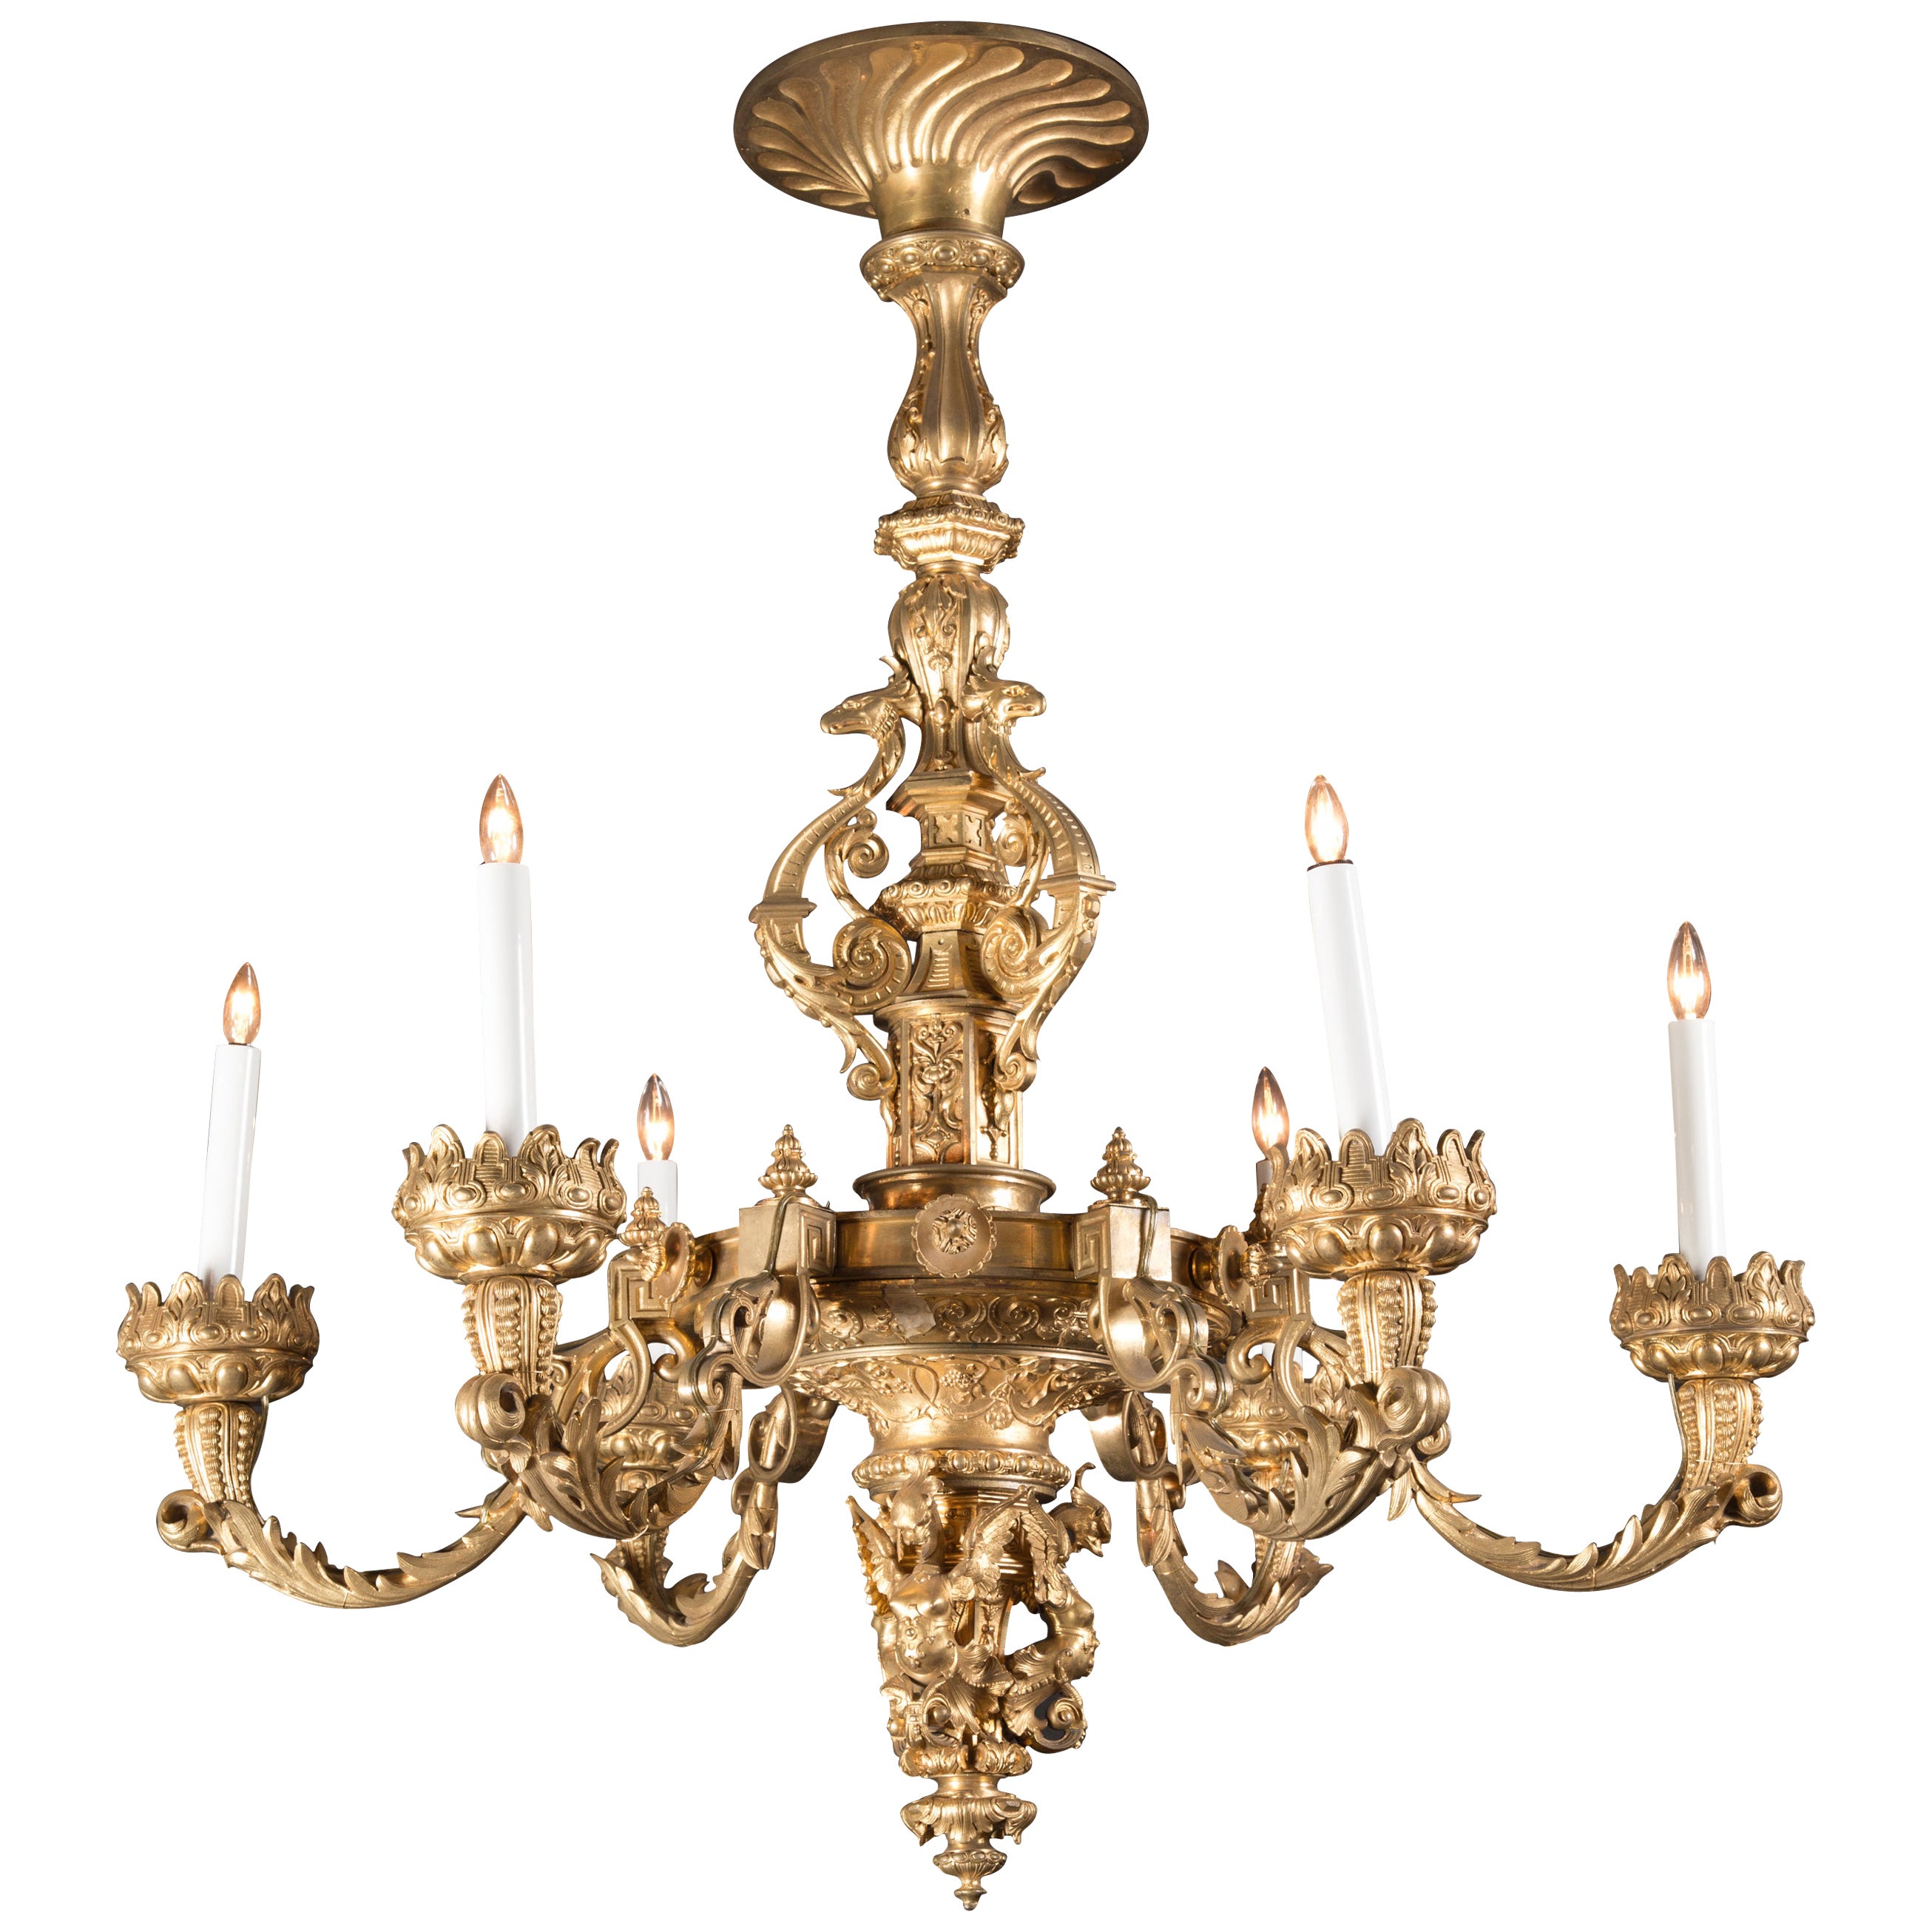 Large Bronze D’ore Gothic Revival Chandelier, French 19th Century For Sale